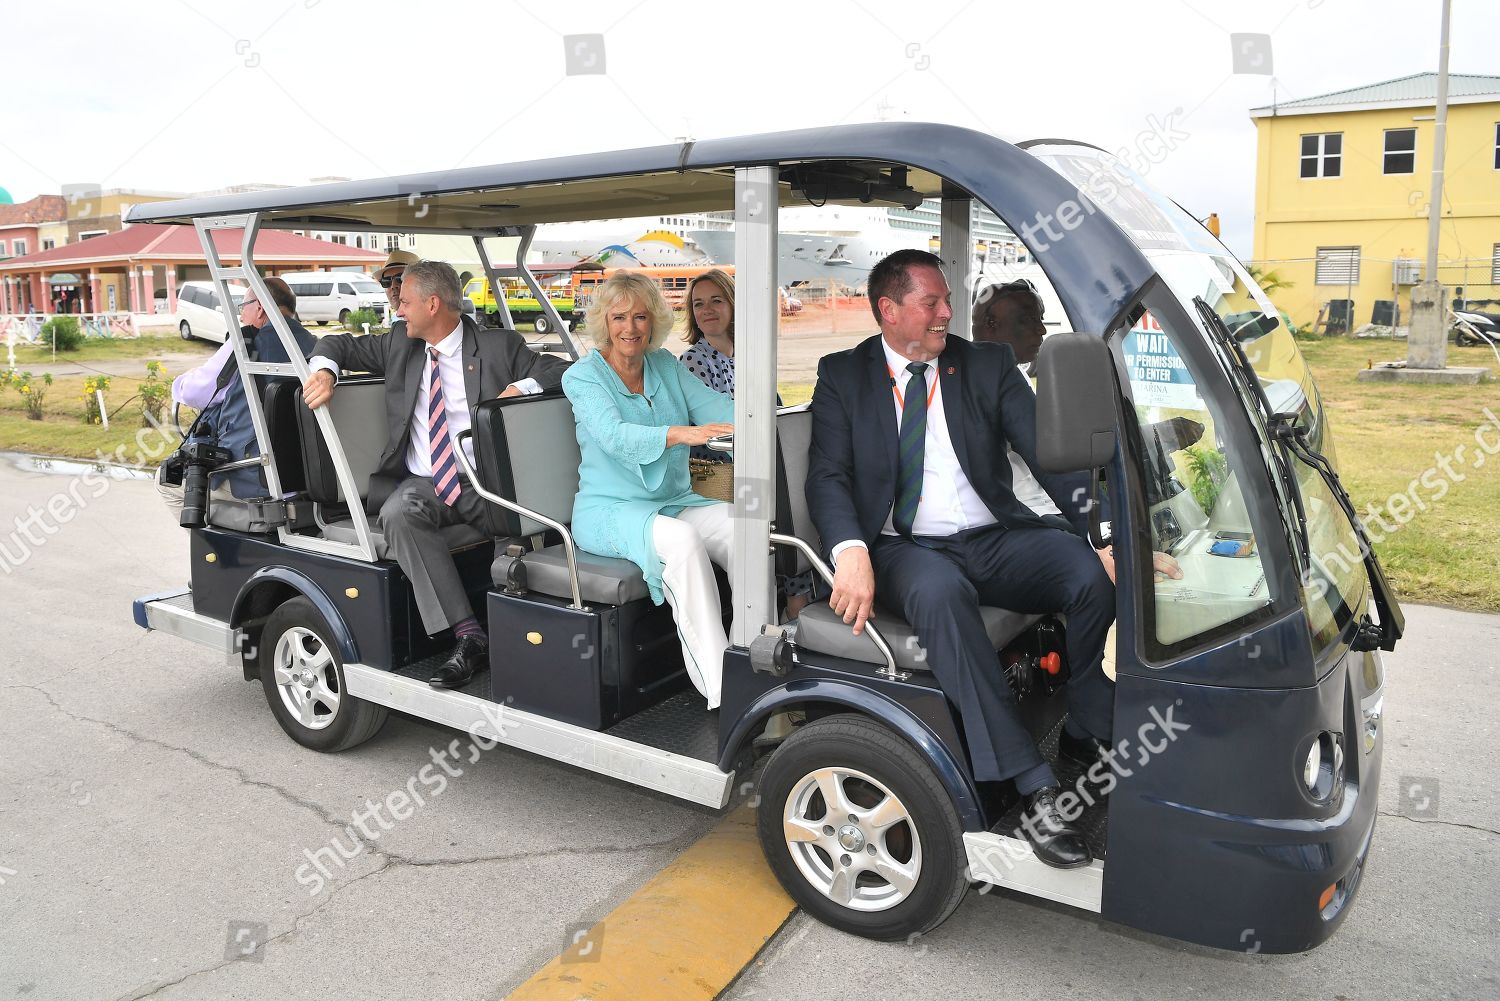 prince-charles-and-camilla-duchess-of-cornwall-caribbean-tour-st-kitts-and-nevis-shutterstock-editorial-10163031aq.jpg